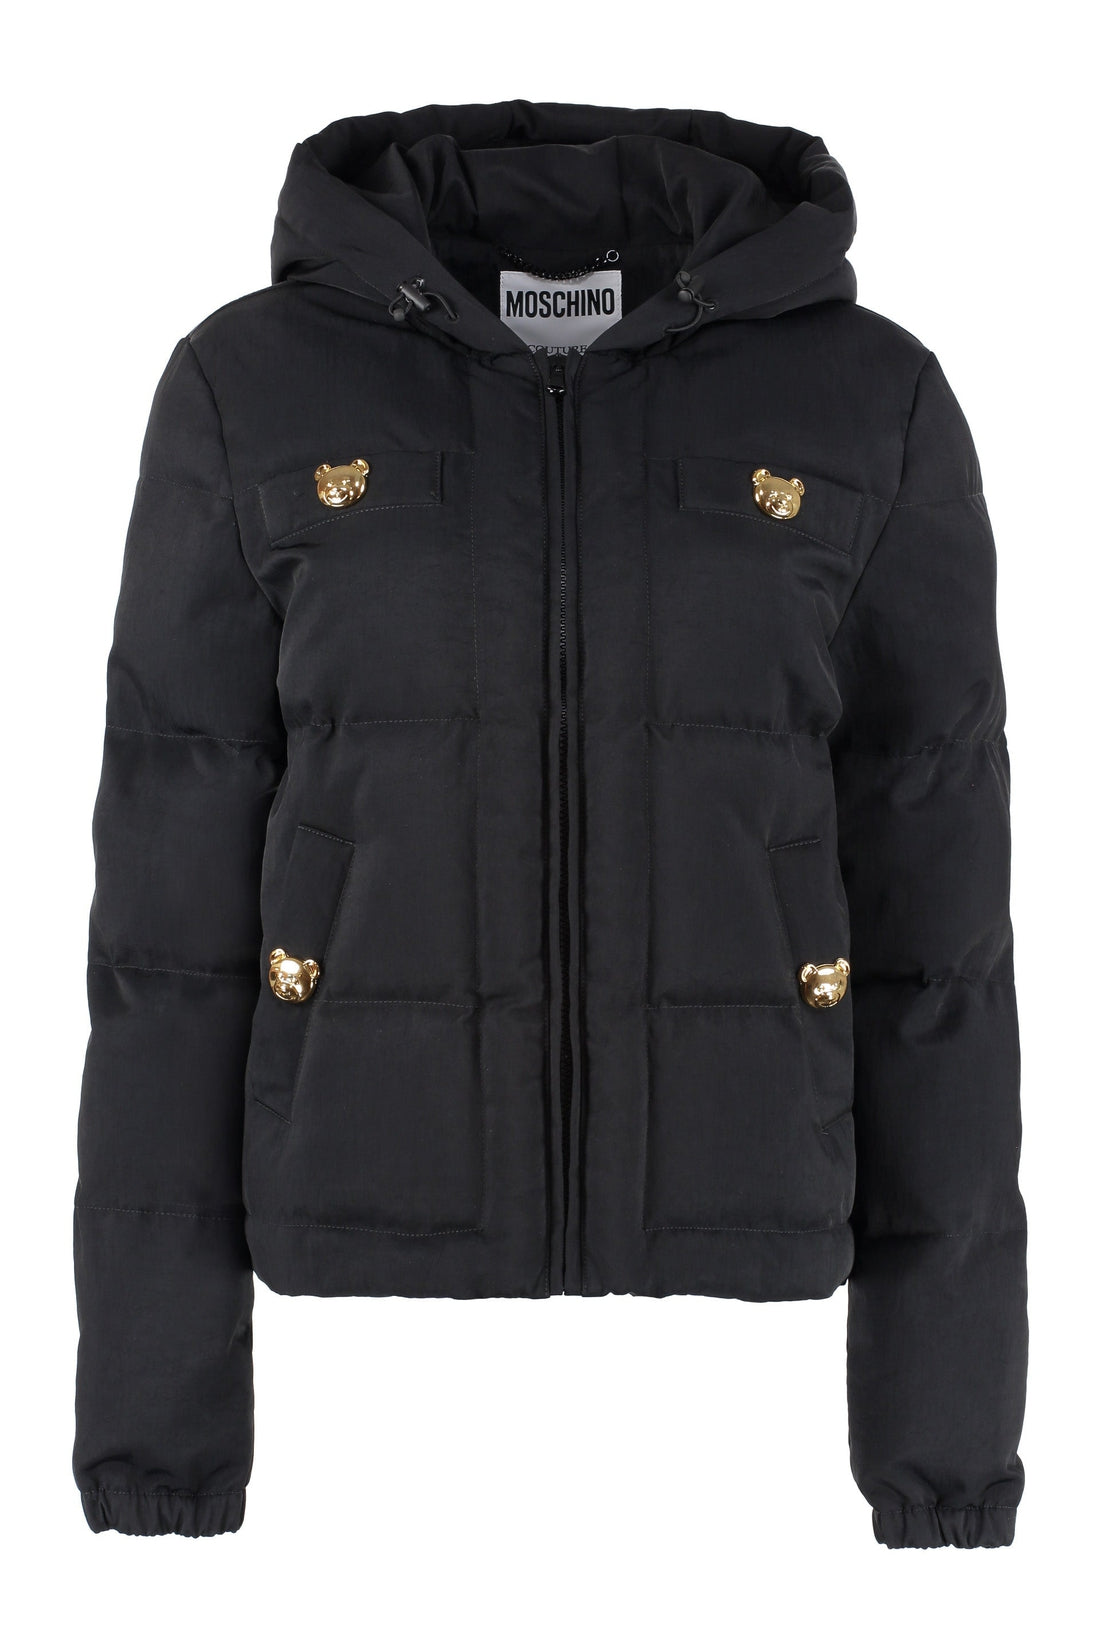 Moschino-OUTLET-SALE-Full zip down jacket-ARCHIVIST